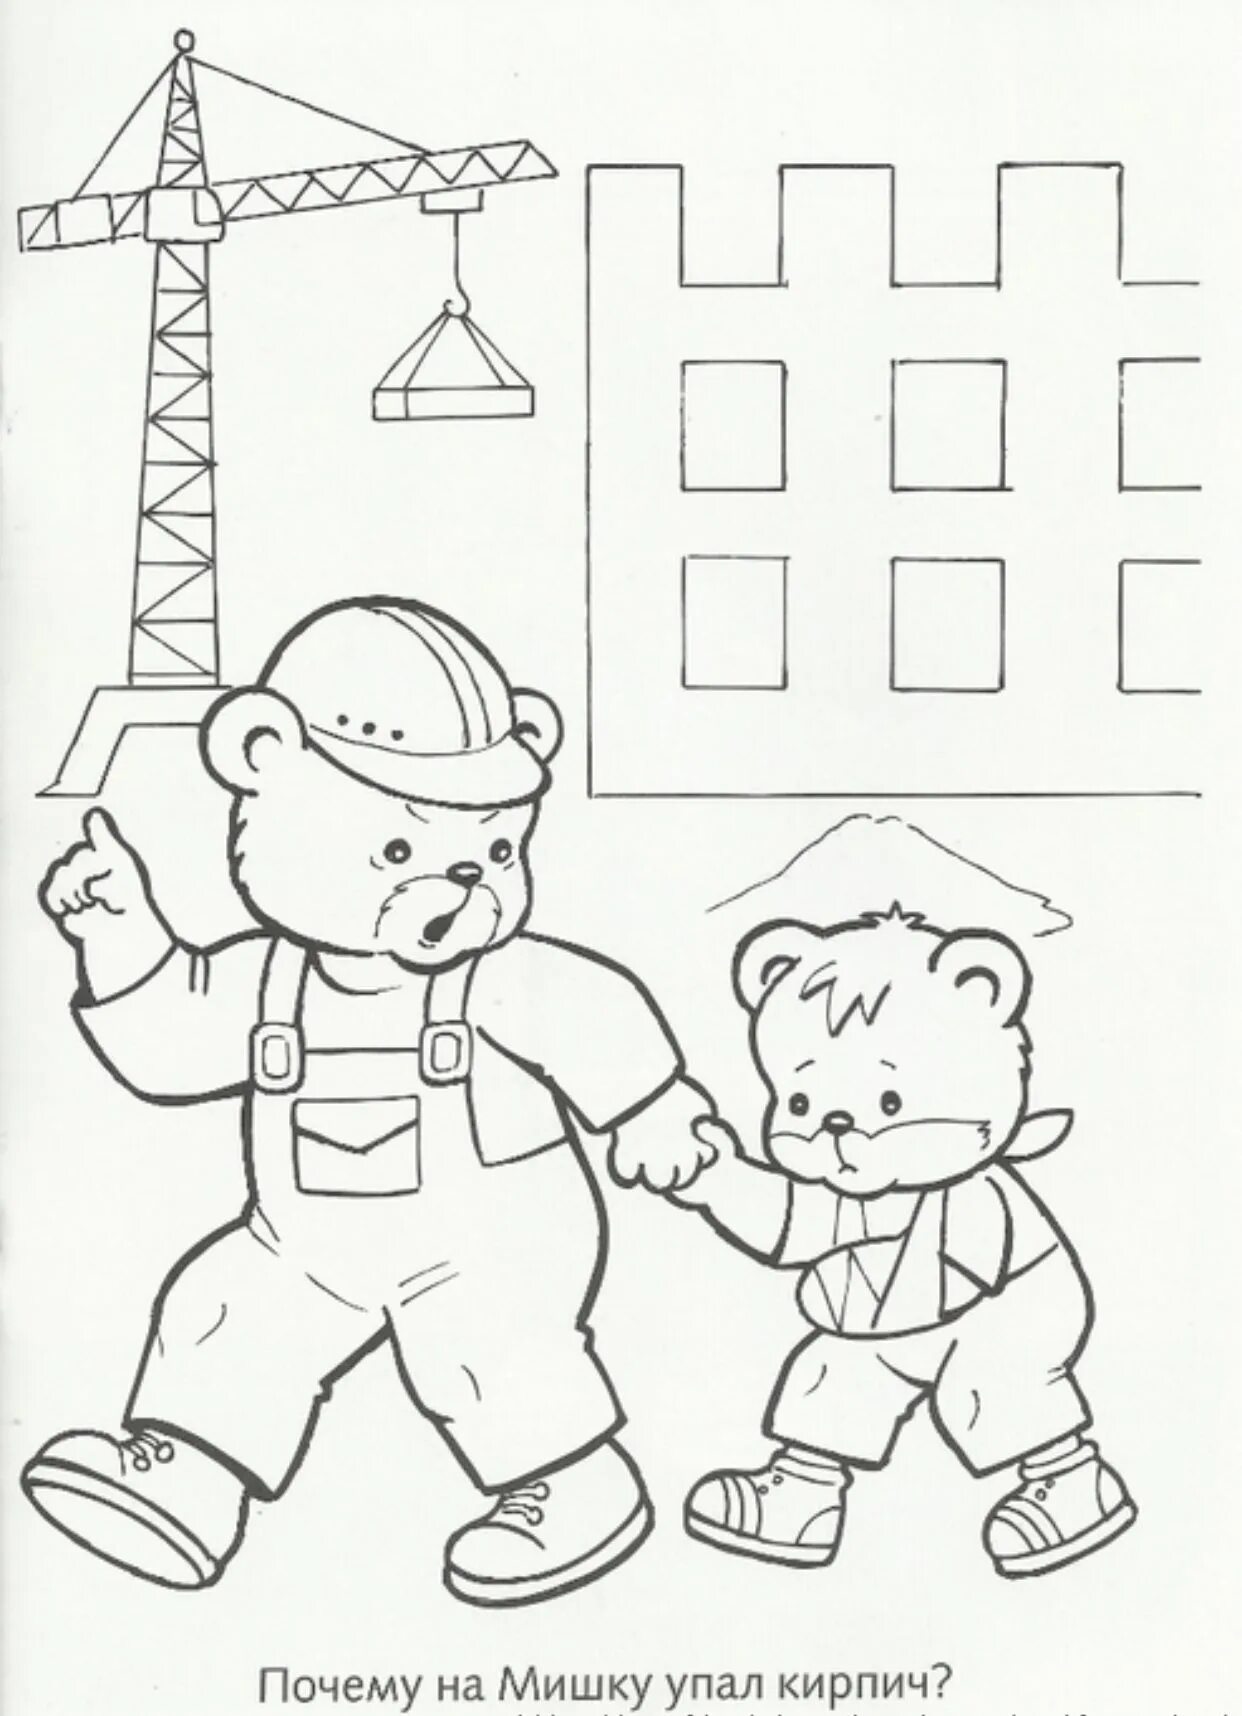 Invitation safety coloring book for kids